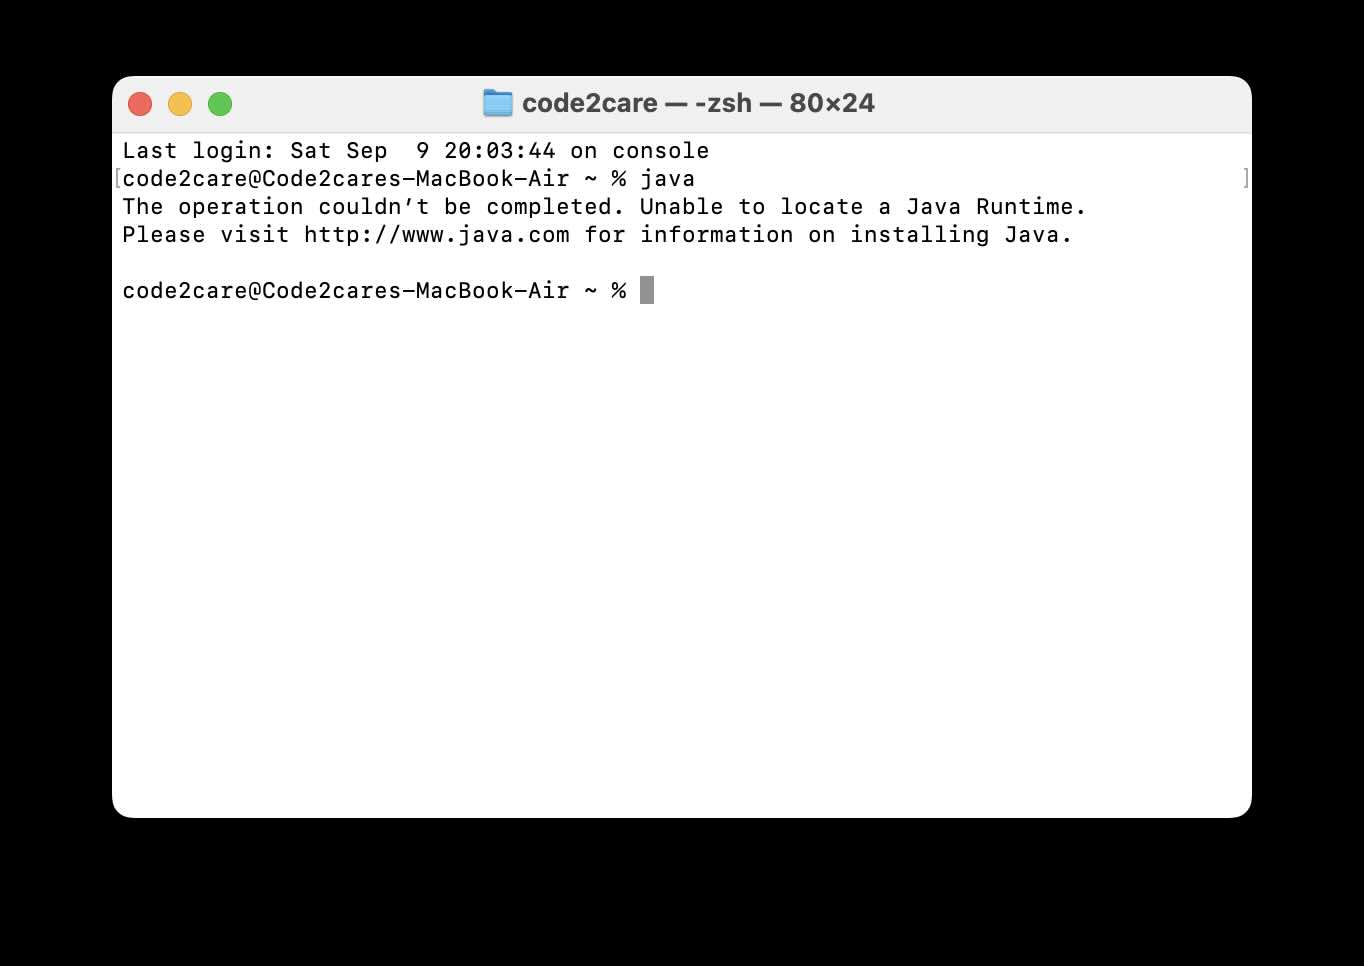 The operation couldnt be completed. Unable to locate a Java Runtime - Mac Terminal Error